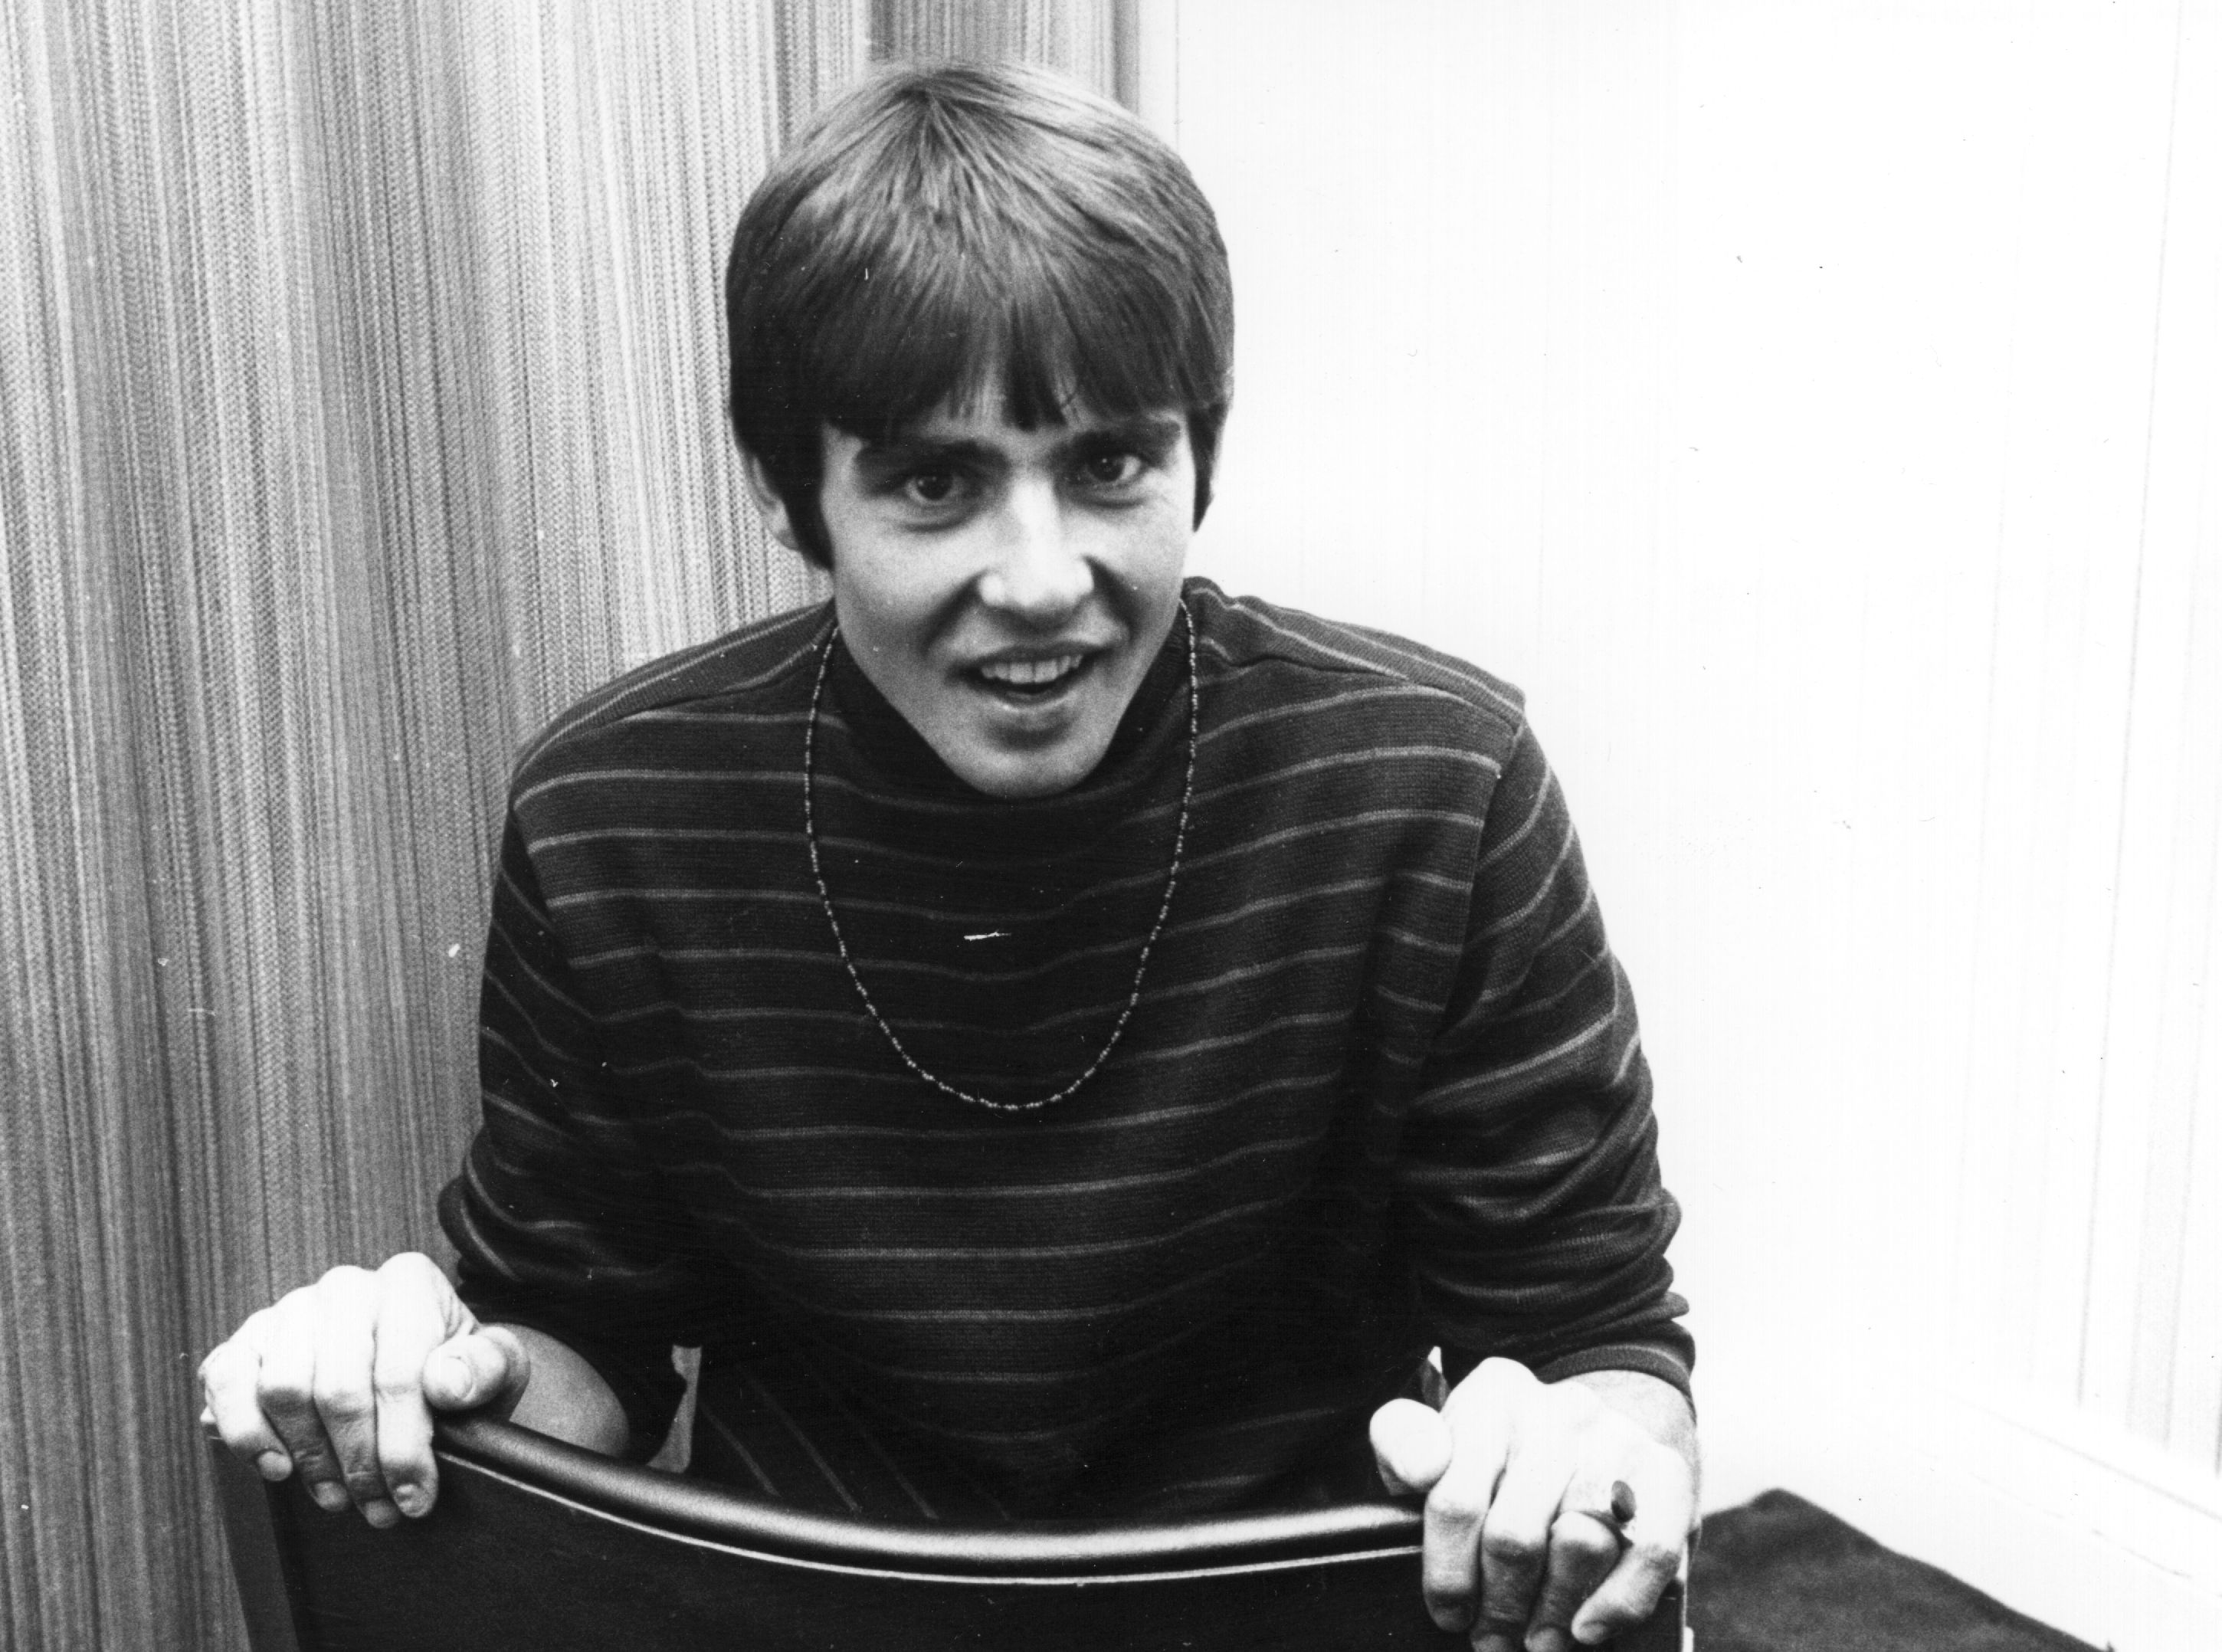 Davy Jones in a chair during The Monkees' "Daydream Believer" era